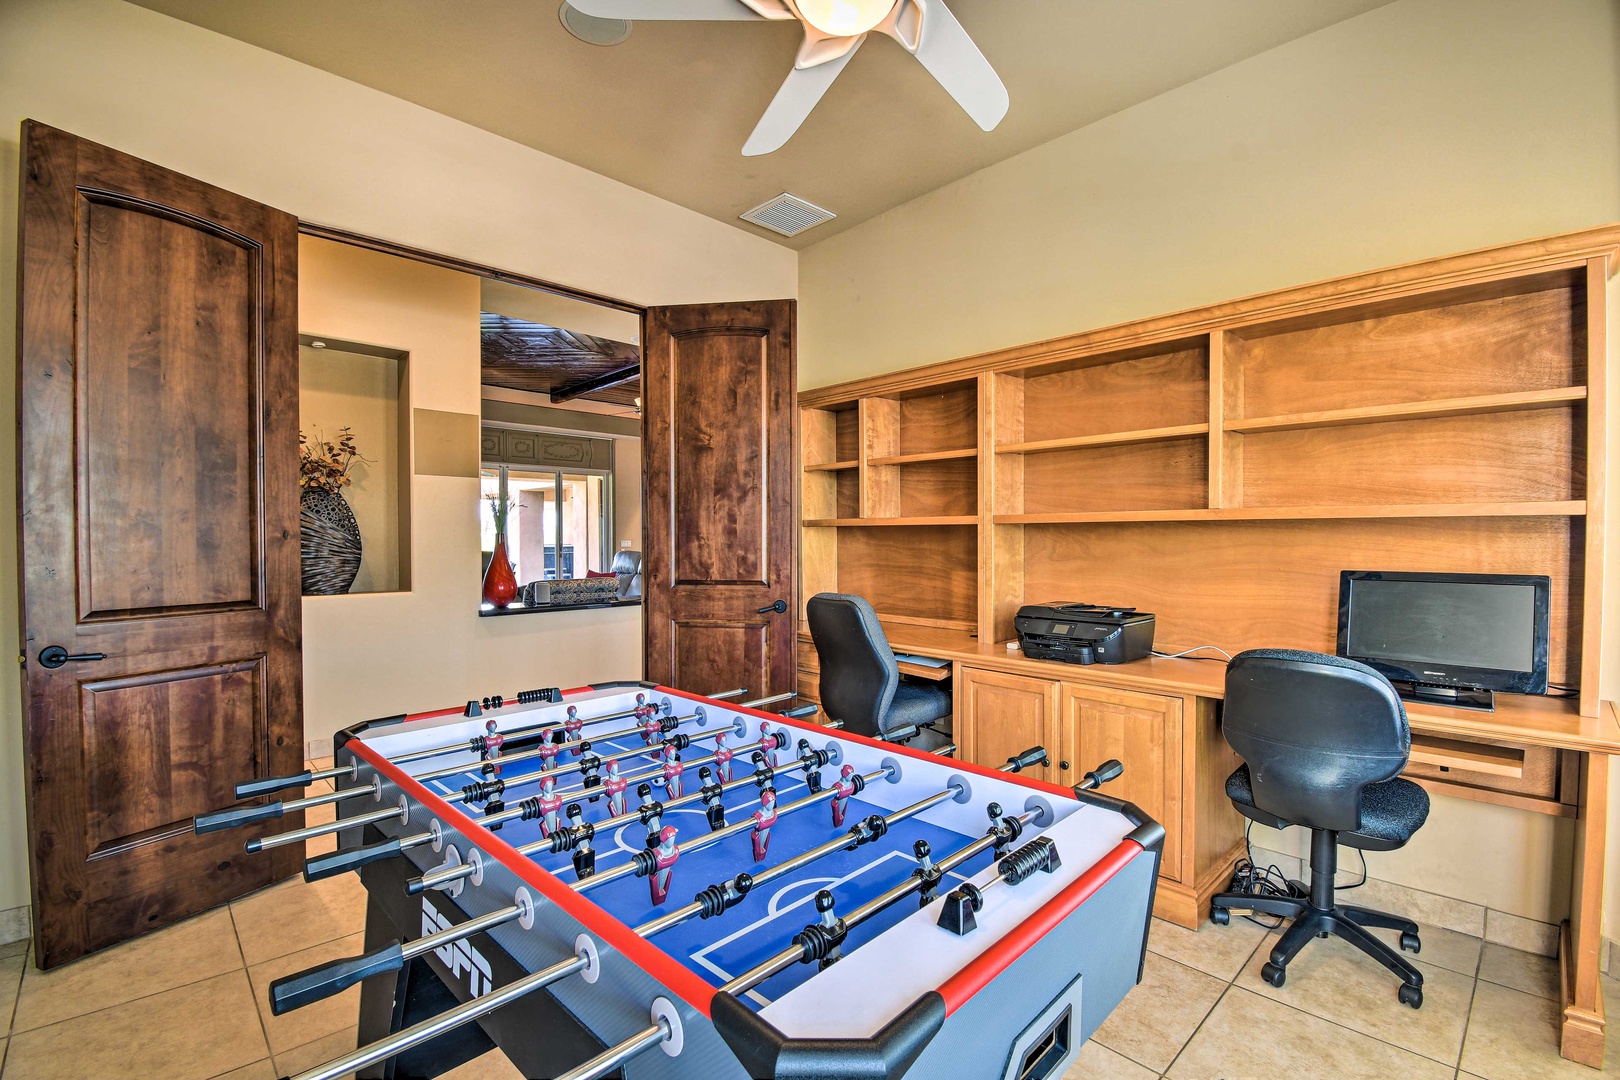 Go head-to-head with a game of foosball or catch up on emails in the office